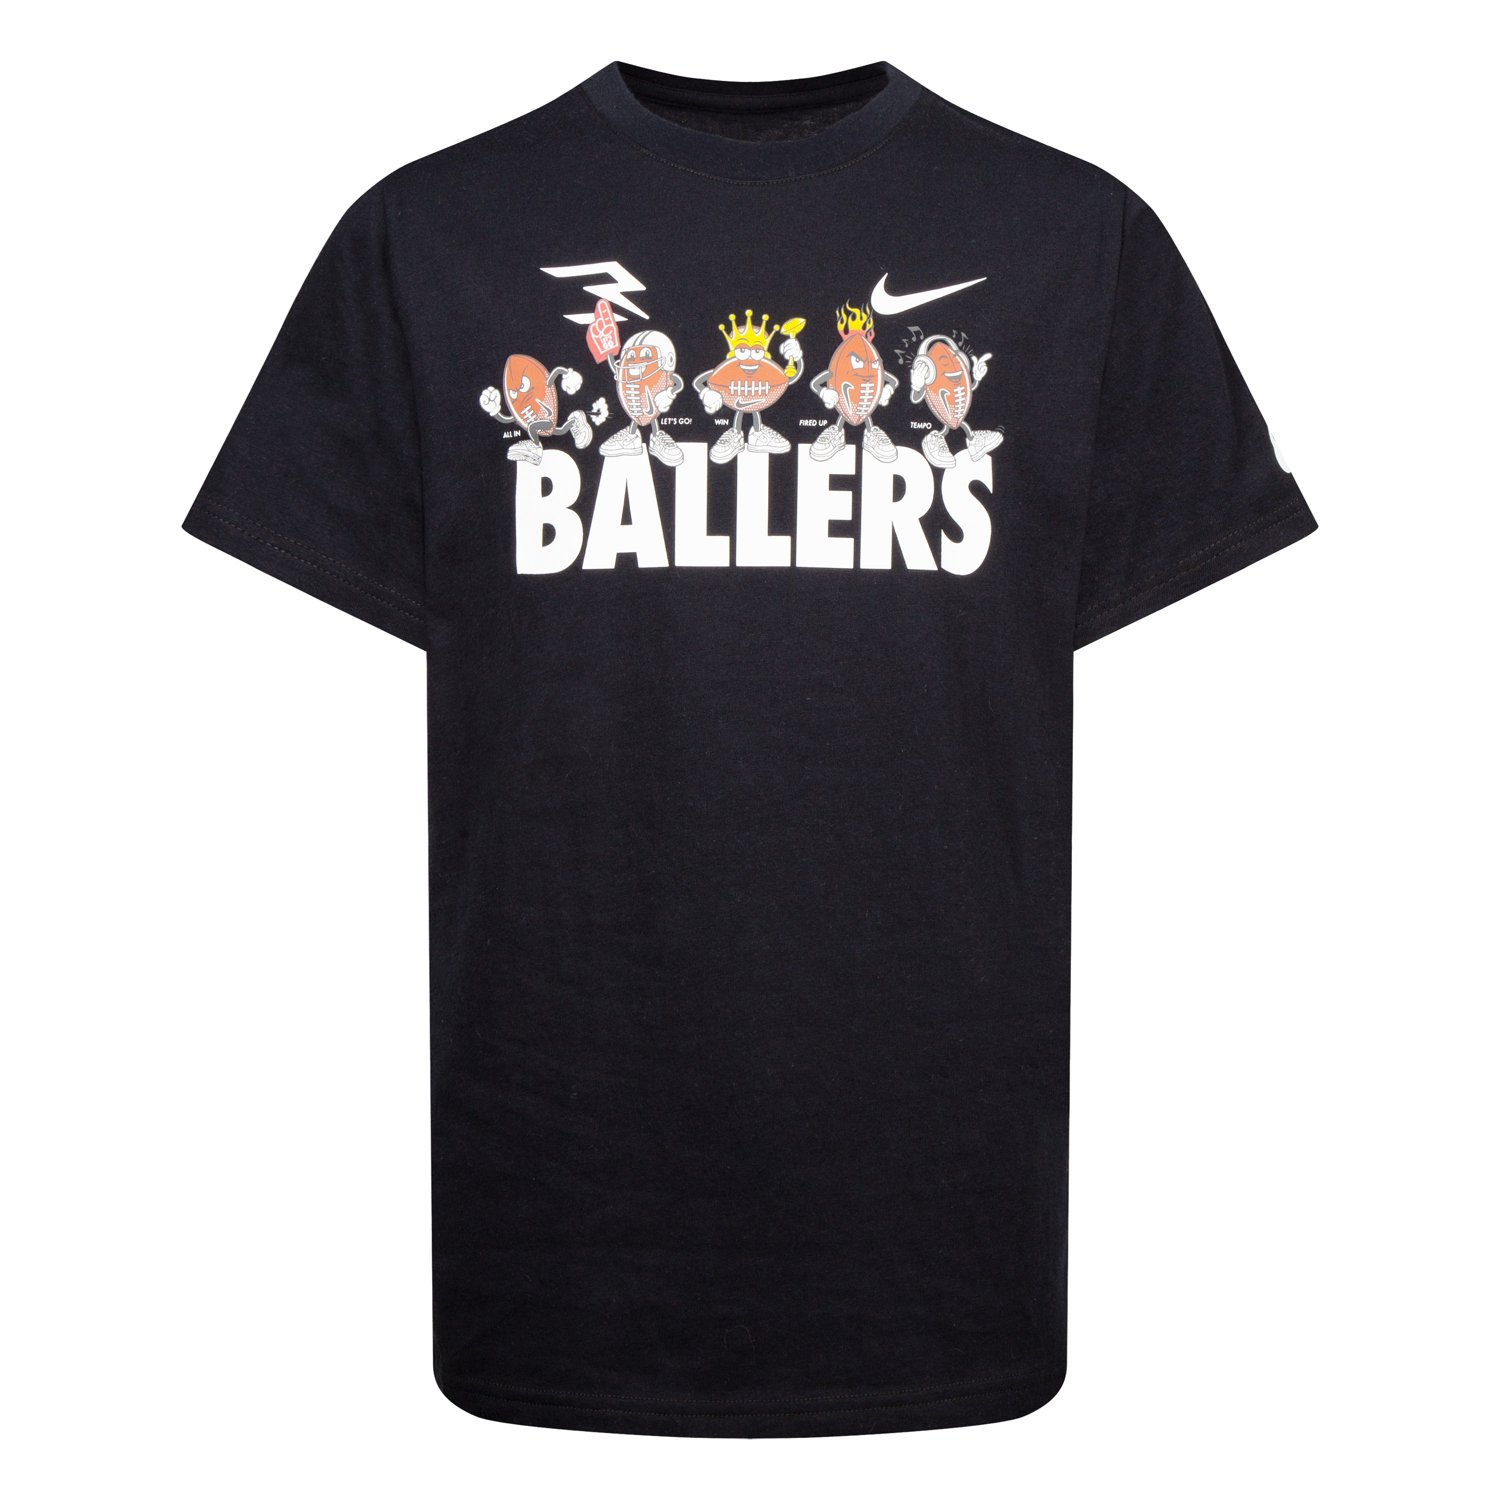 Nike Boys' 3BRAND by Russell Wilson Ballers Graphic T-shirt | Academy